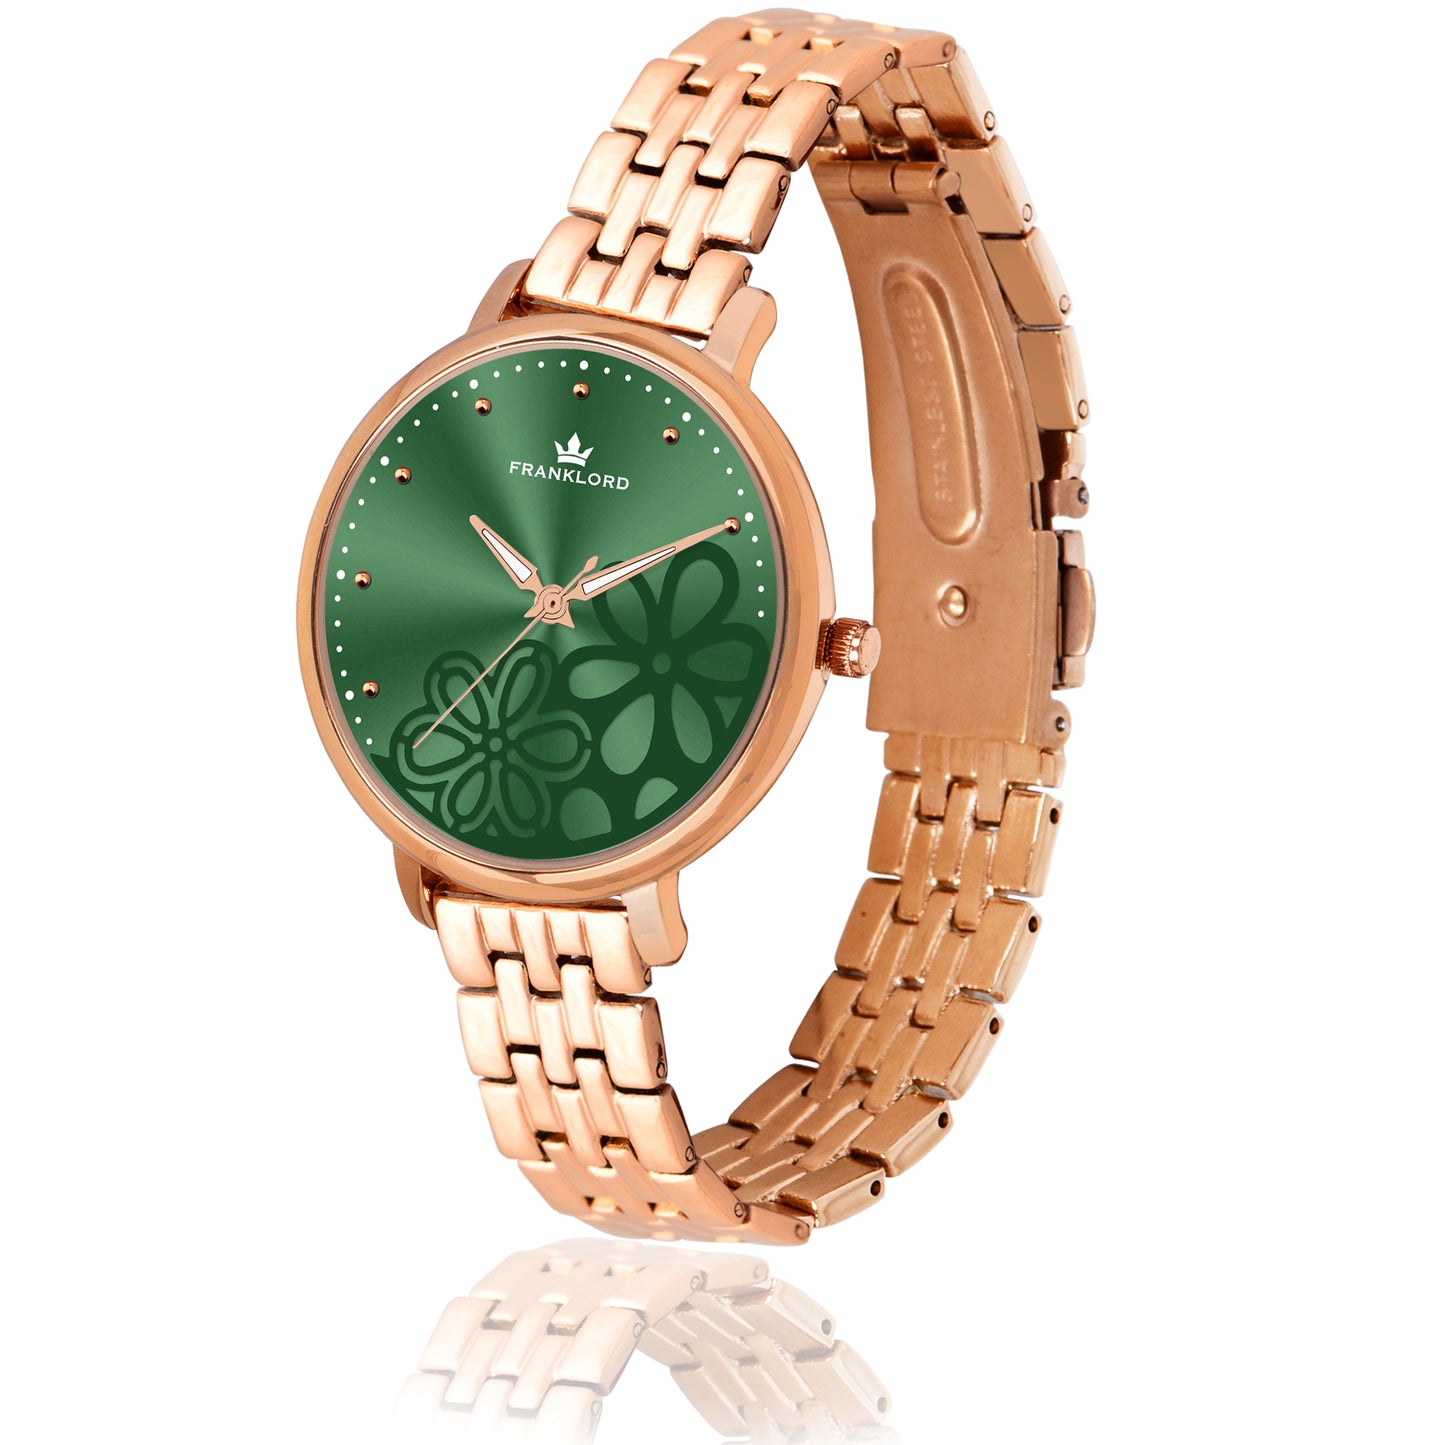 THE FLORA -Green Dial & Rose Gold Strap -Timeless Elegance Watch For Women F-133 GNRL